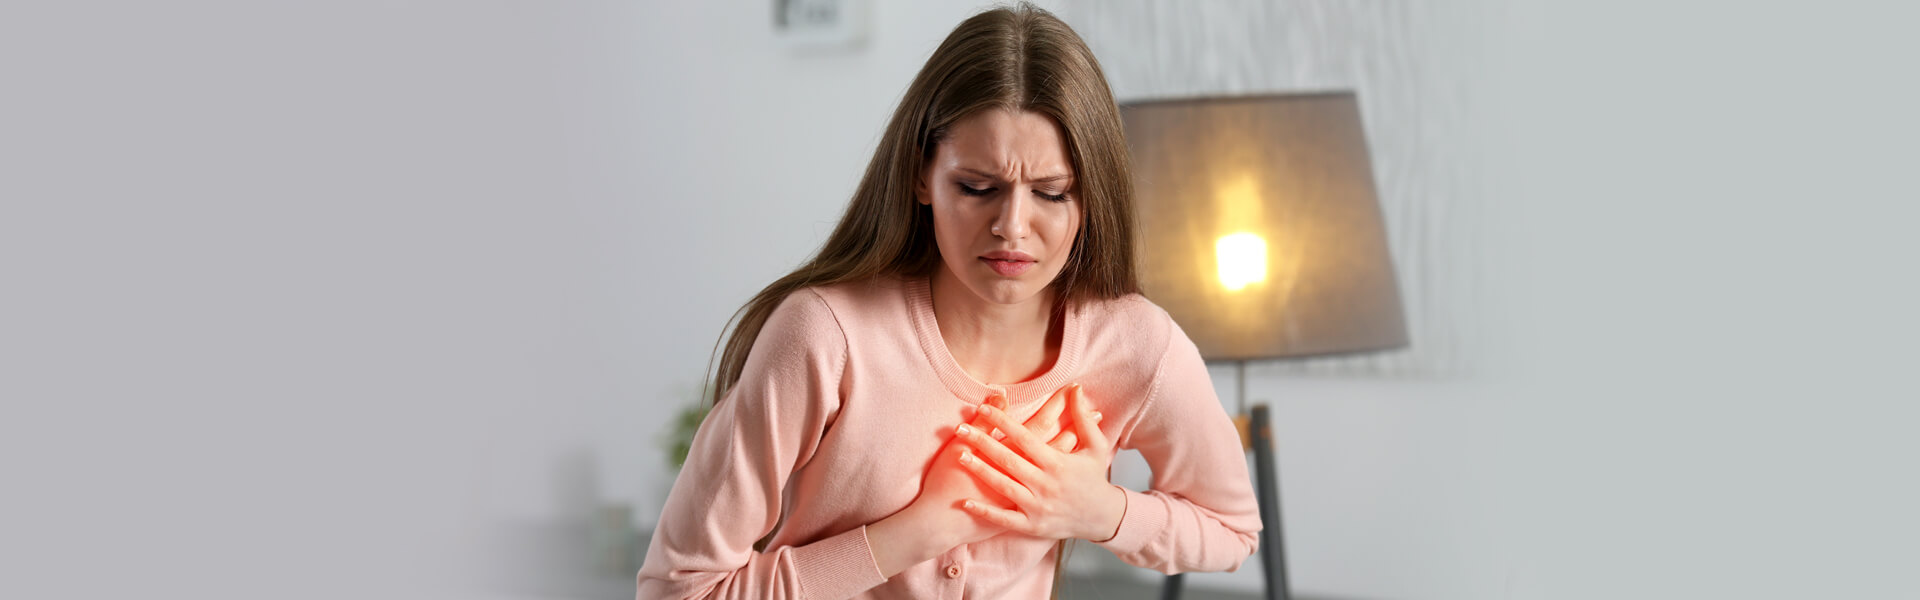 A Cardiac Emergency Is More Than Sudden Chest Pain